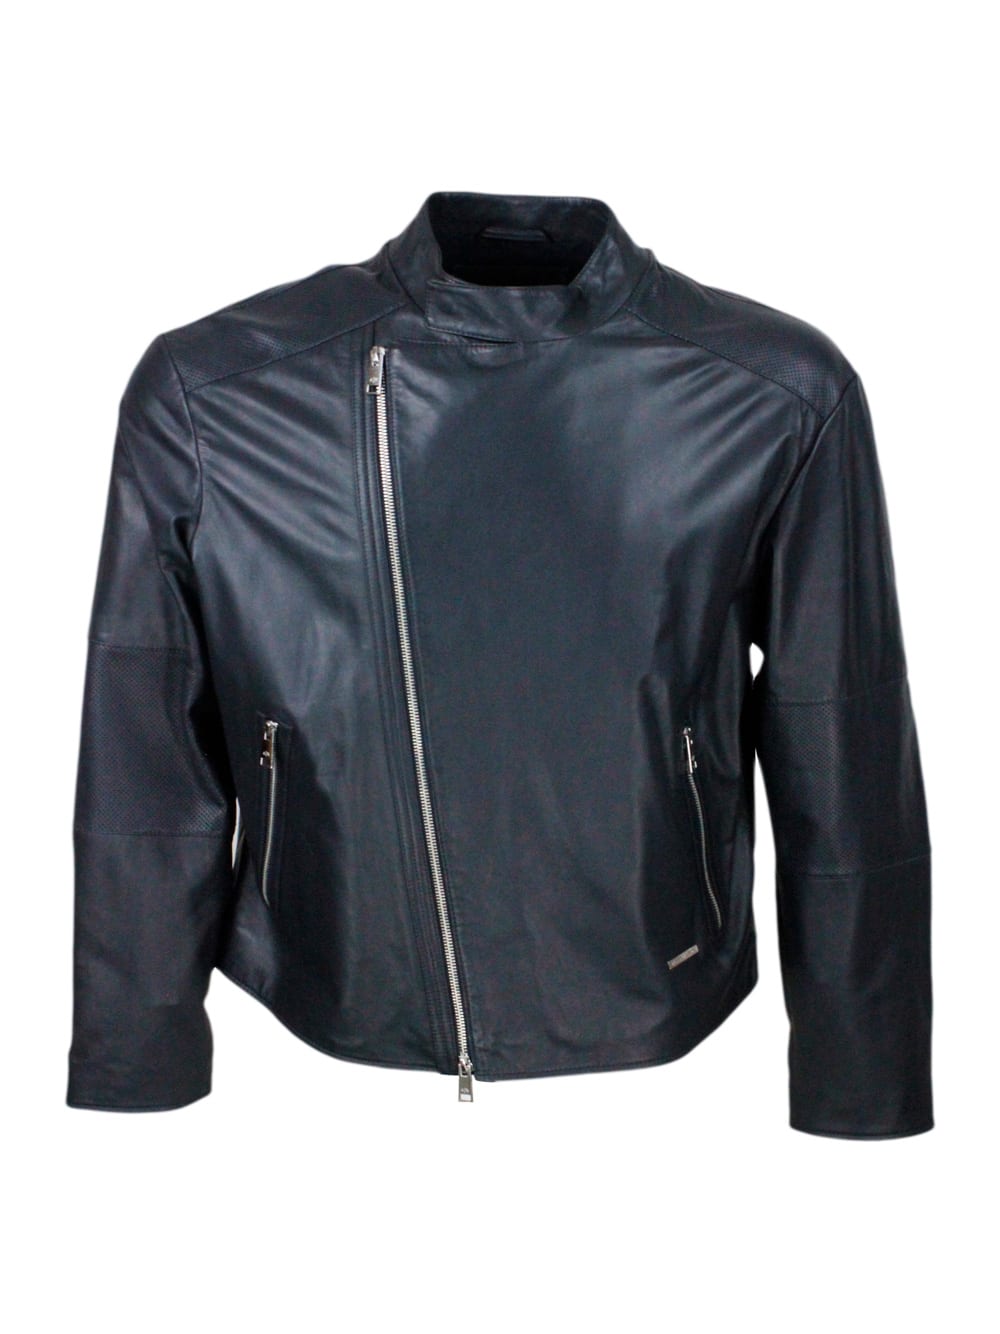 Jacket With Zip Closure Made Of Soft Lambskin With Perforated Leather Details. Zip On Pockets And Cuffs